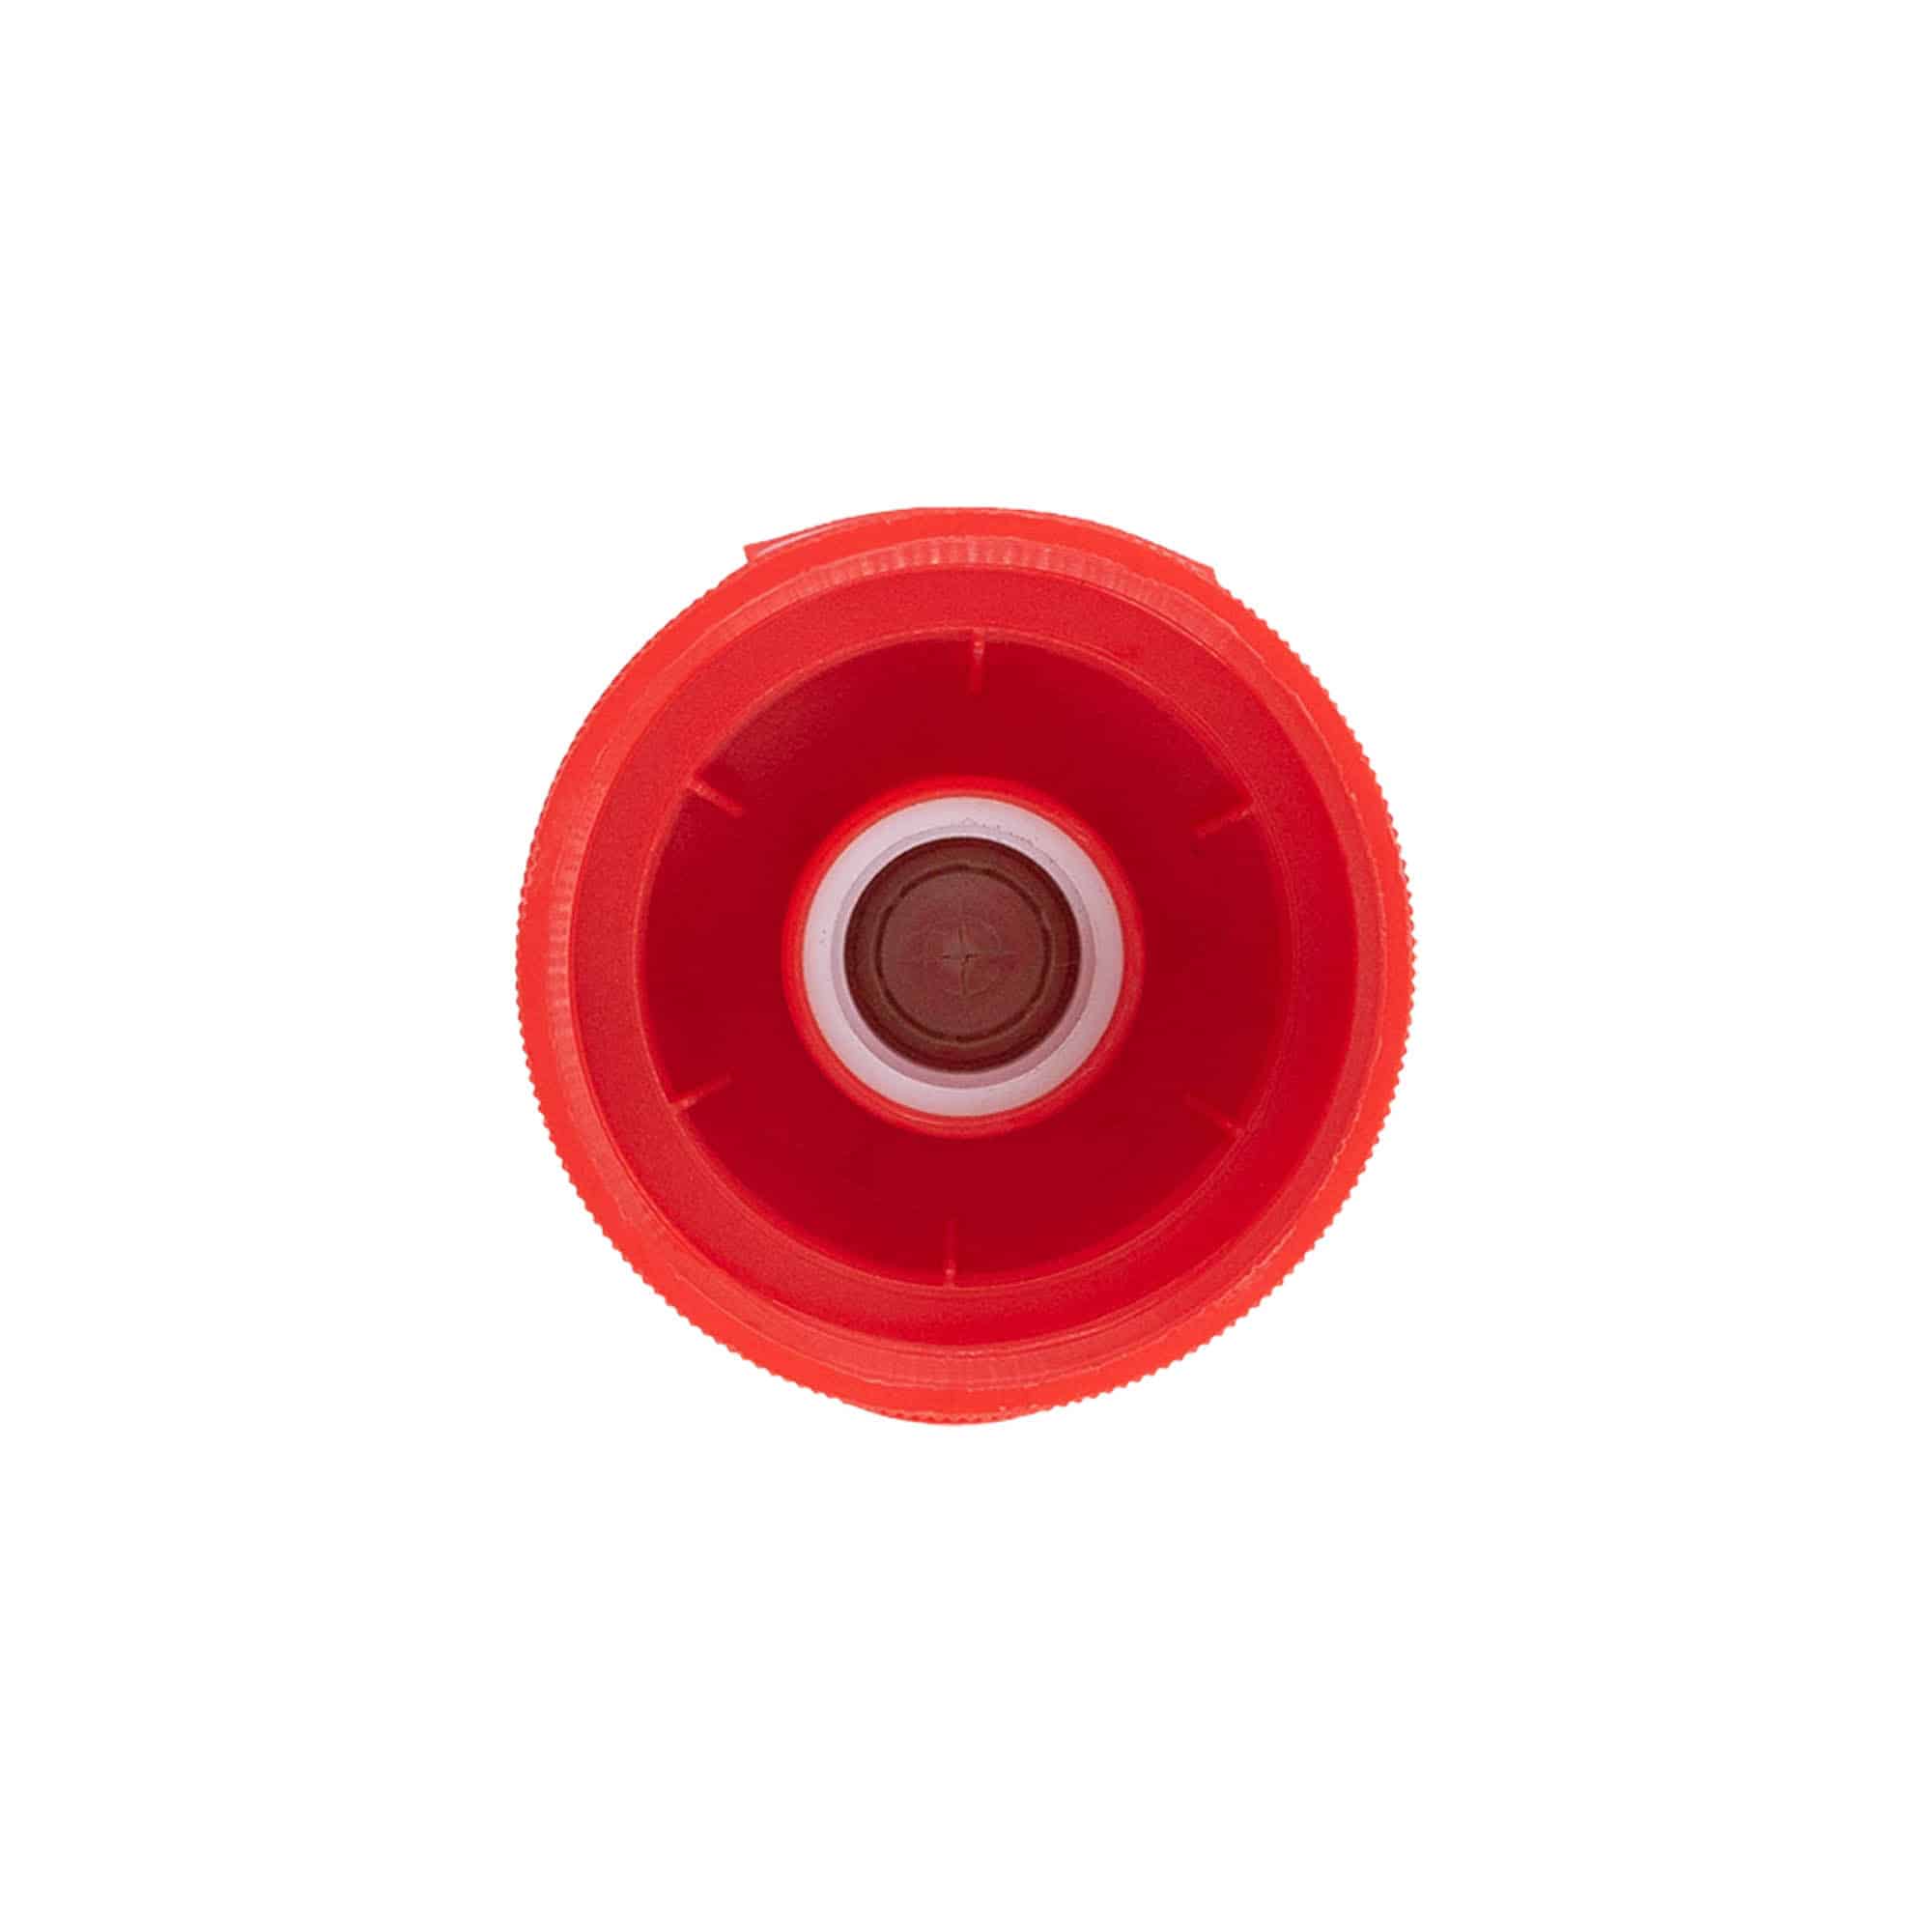 Hinged screw cap, PP plastic, red, for opening: GPI 38/400